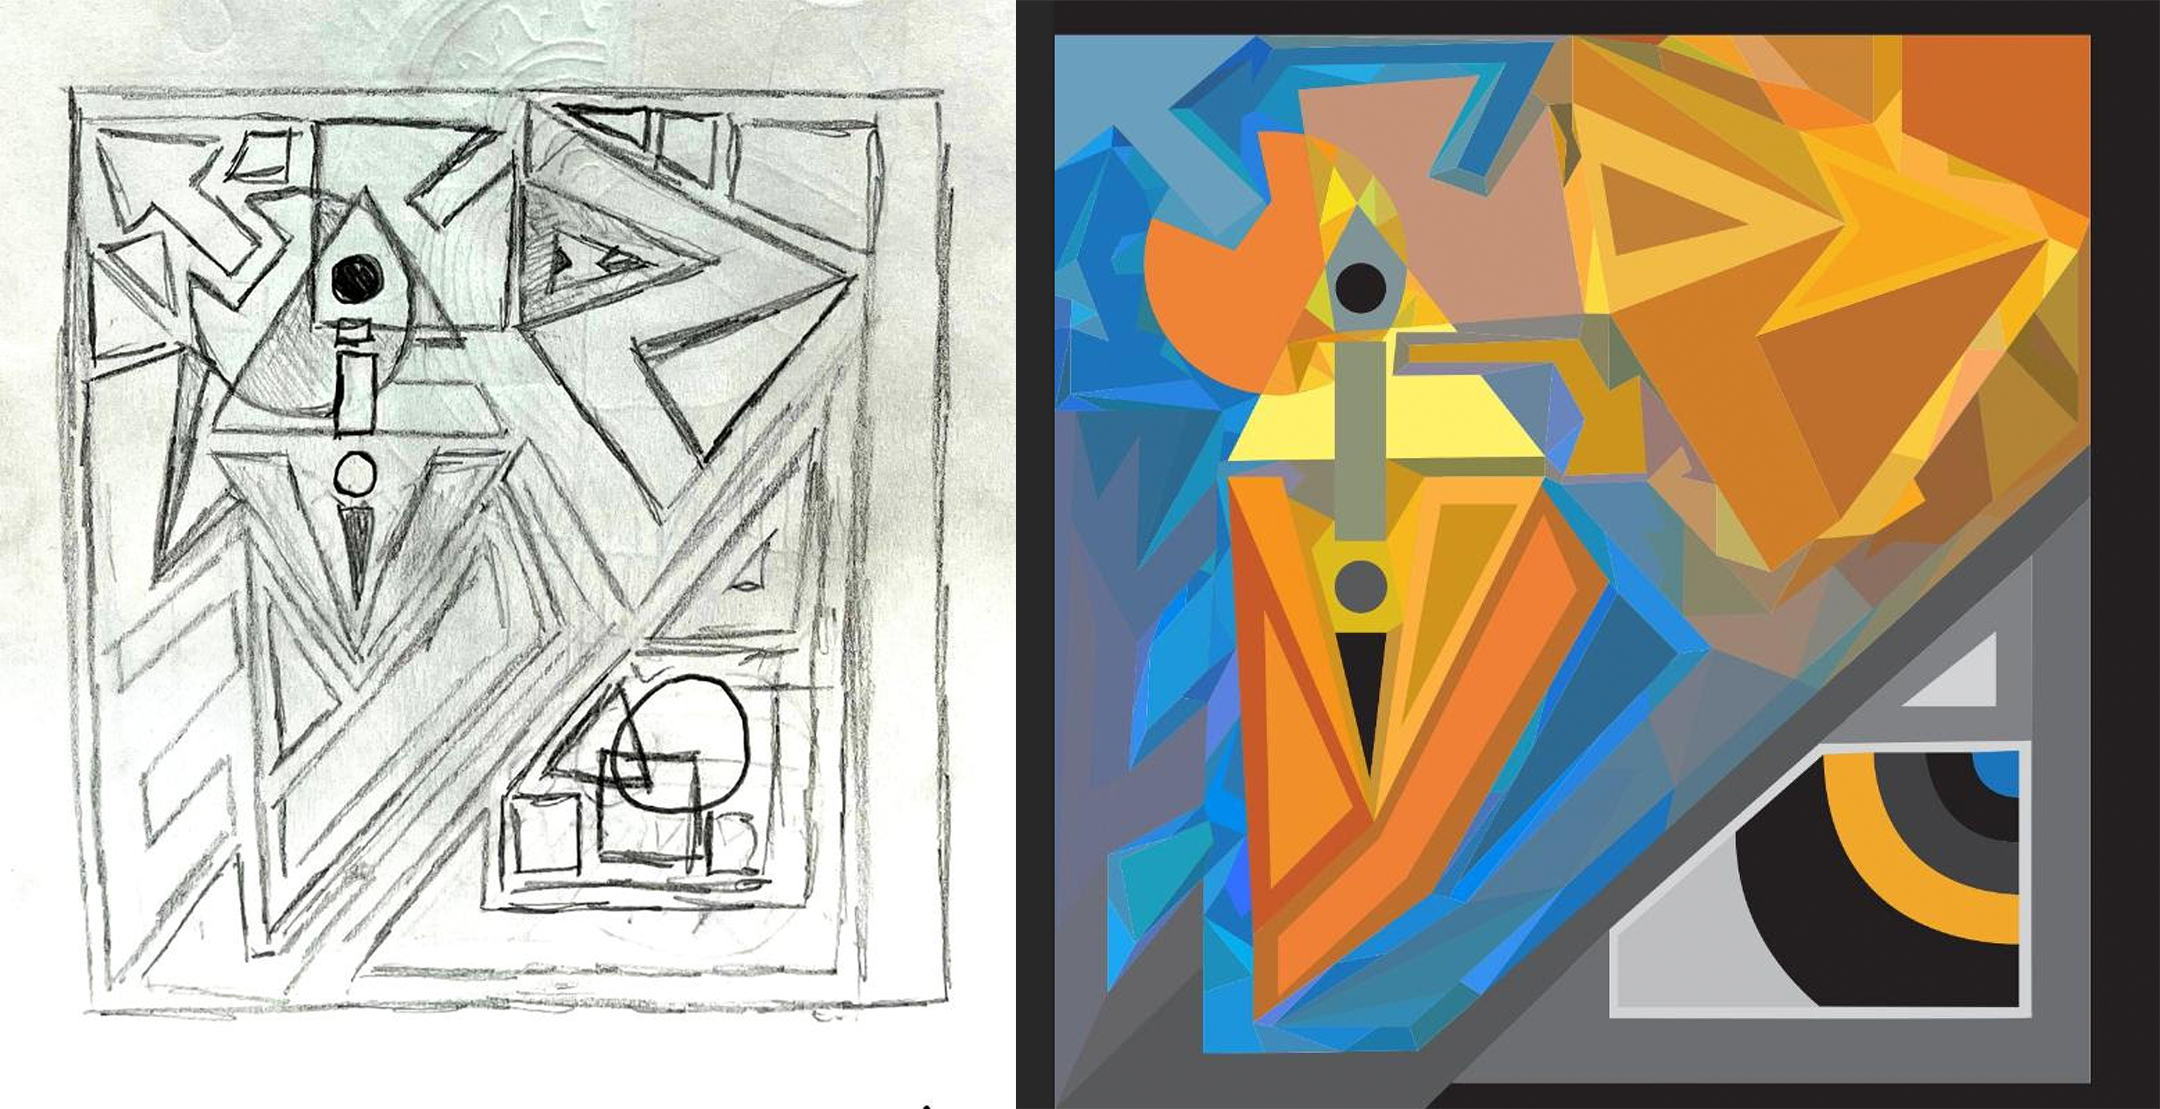 Black and white pencil sketch, on the left, and the final abstract illustration, on the right, in blues, grays, oranges, and yellows